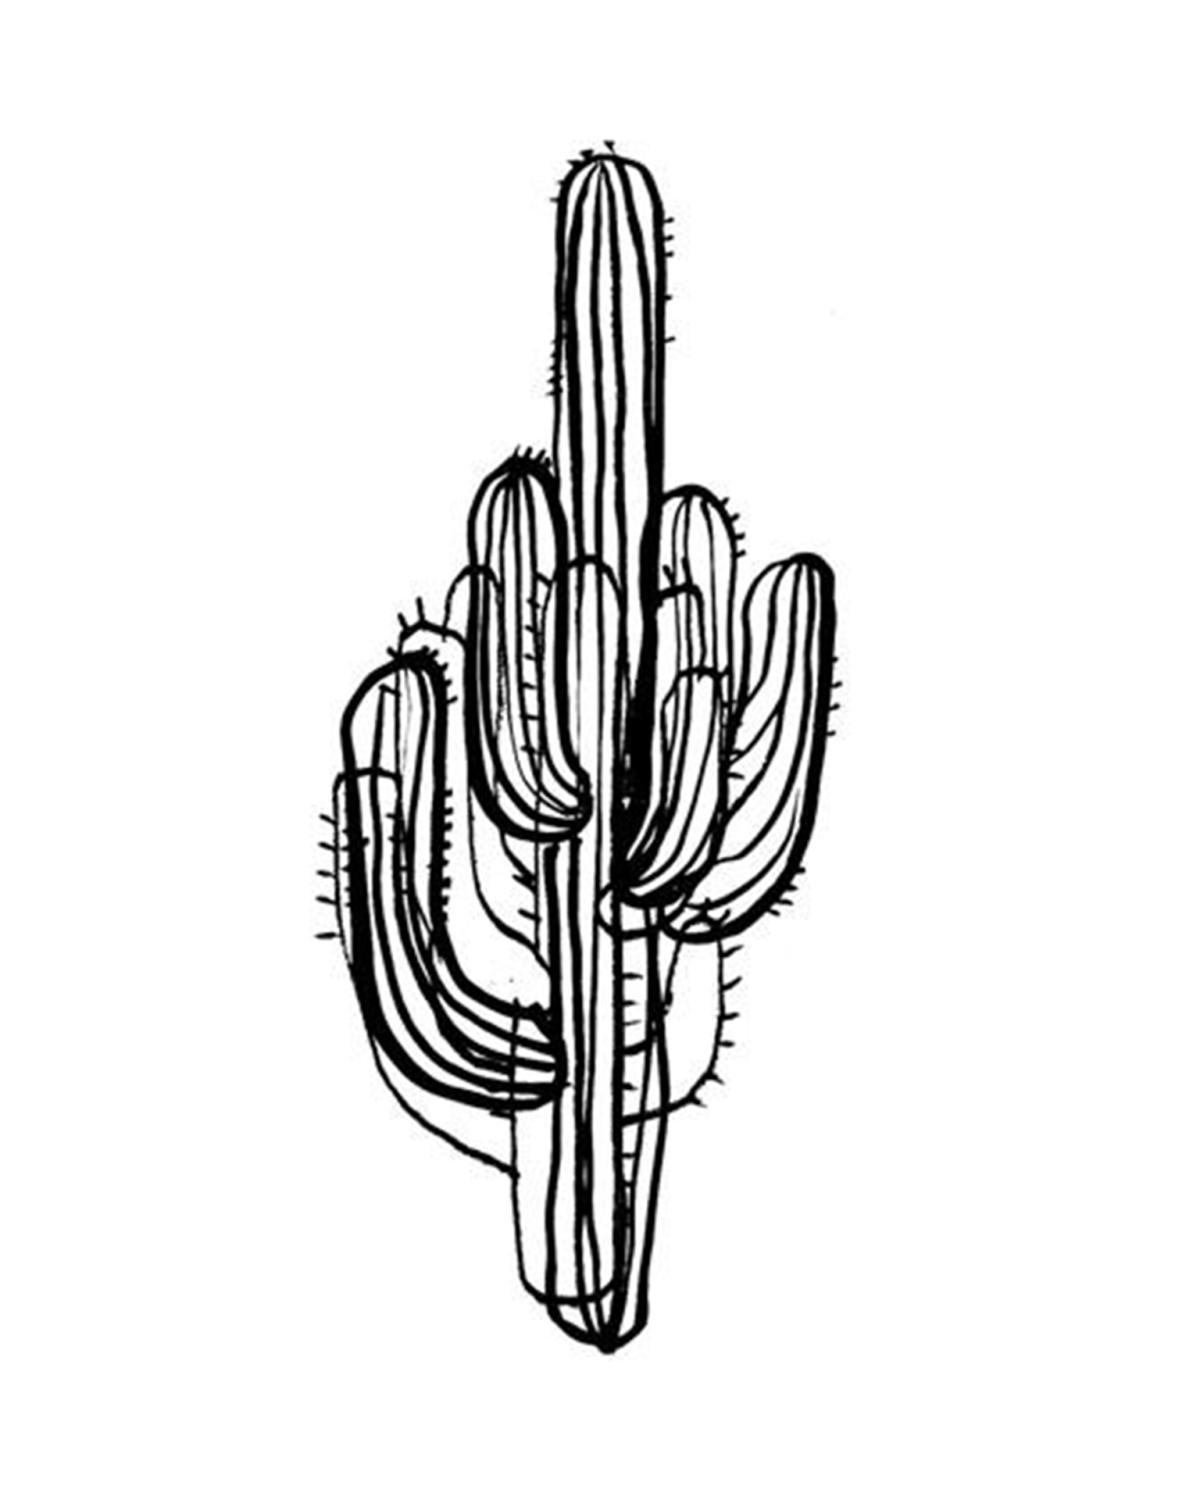 Saguaro Cactus Drawing | Free download on ClipArtMag